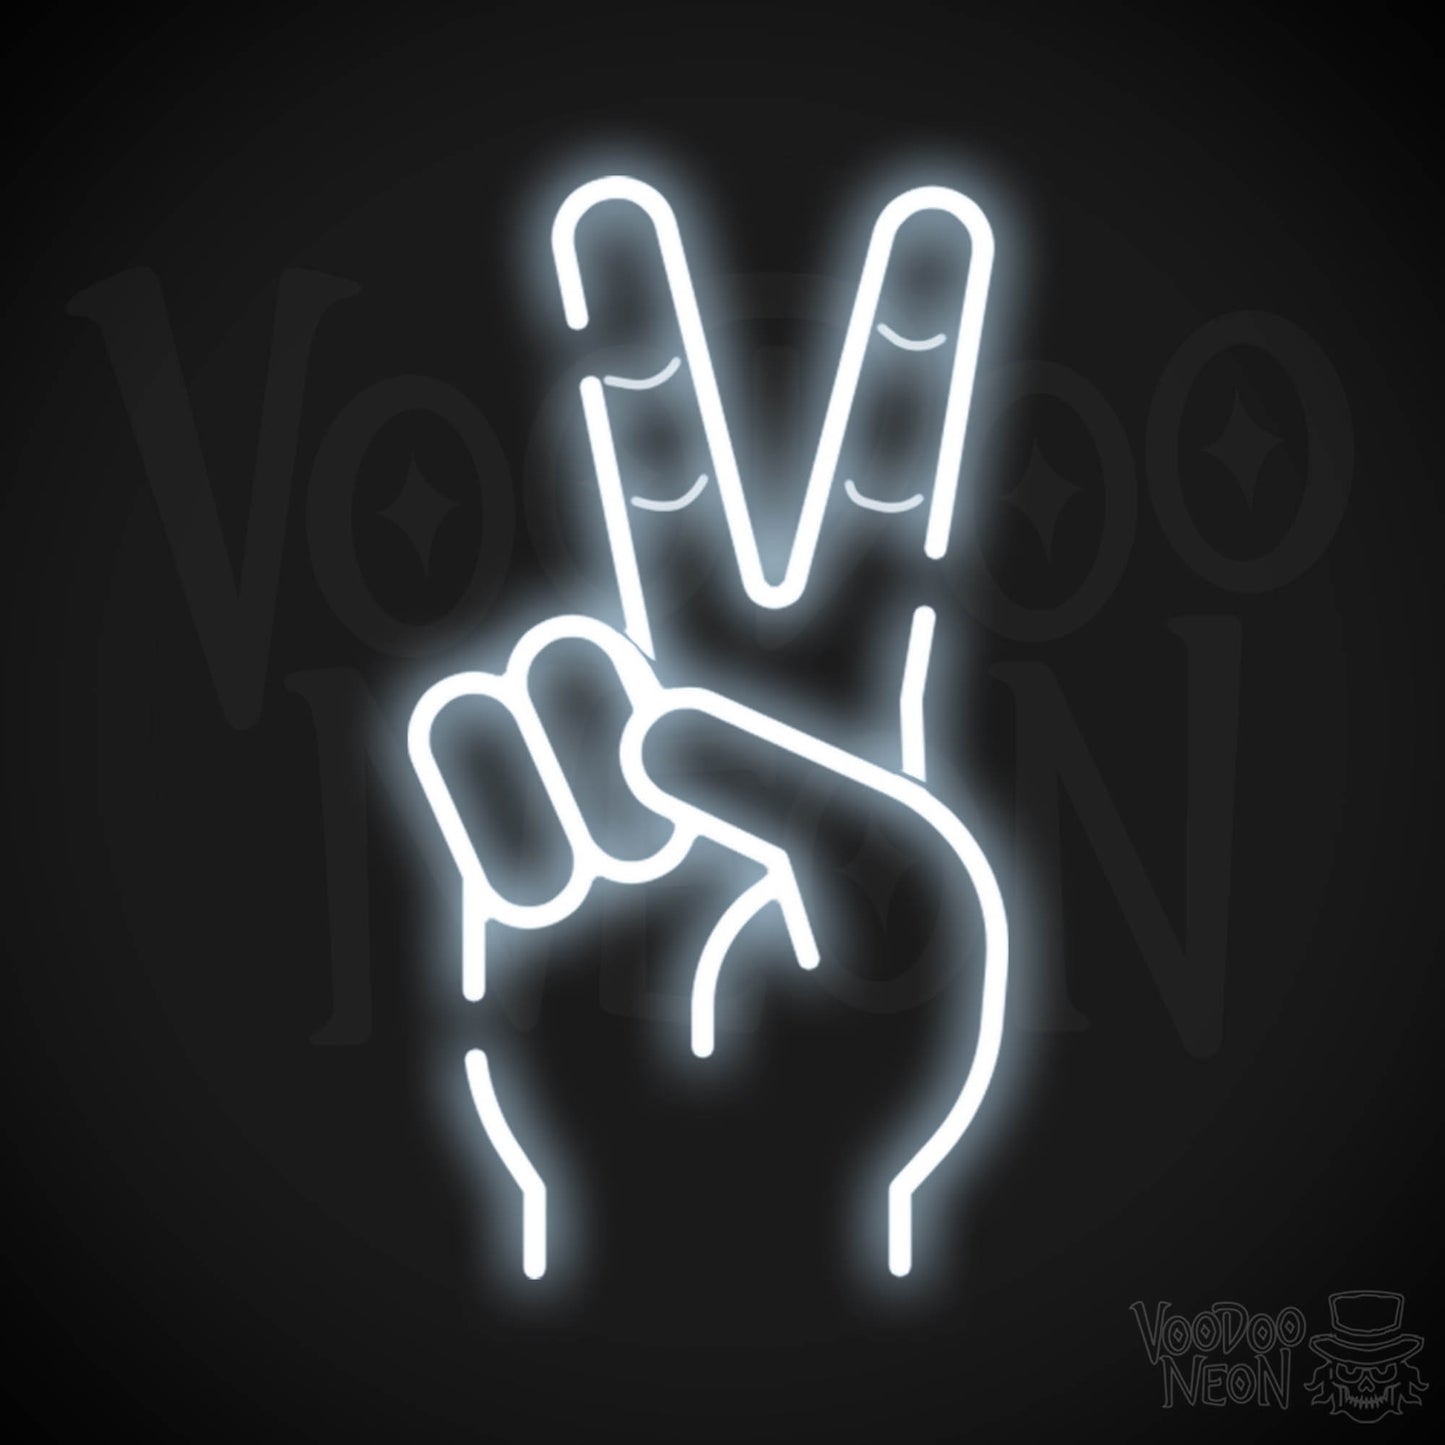 Neon Peace Sign - Peace Symbol Neon Wall Art - Color Cool White